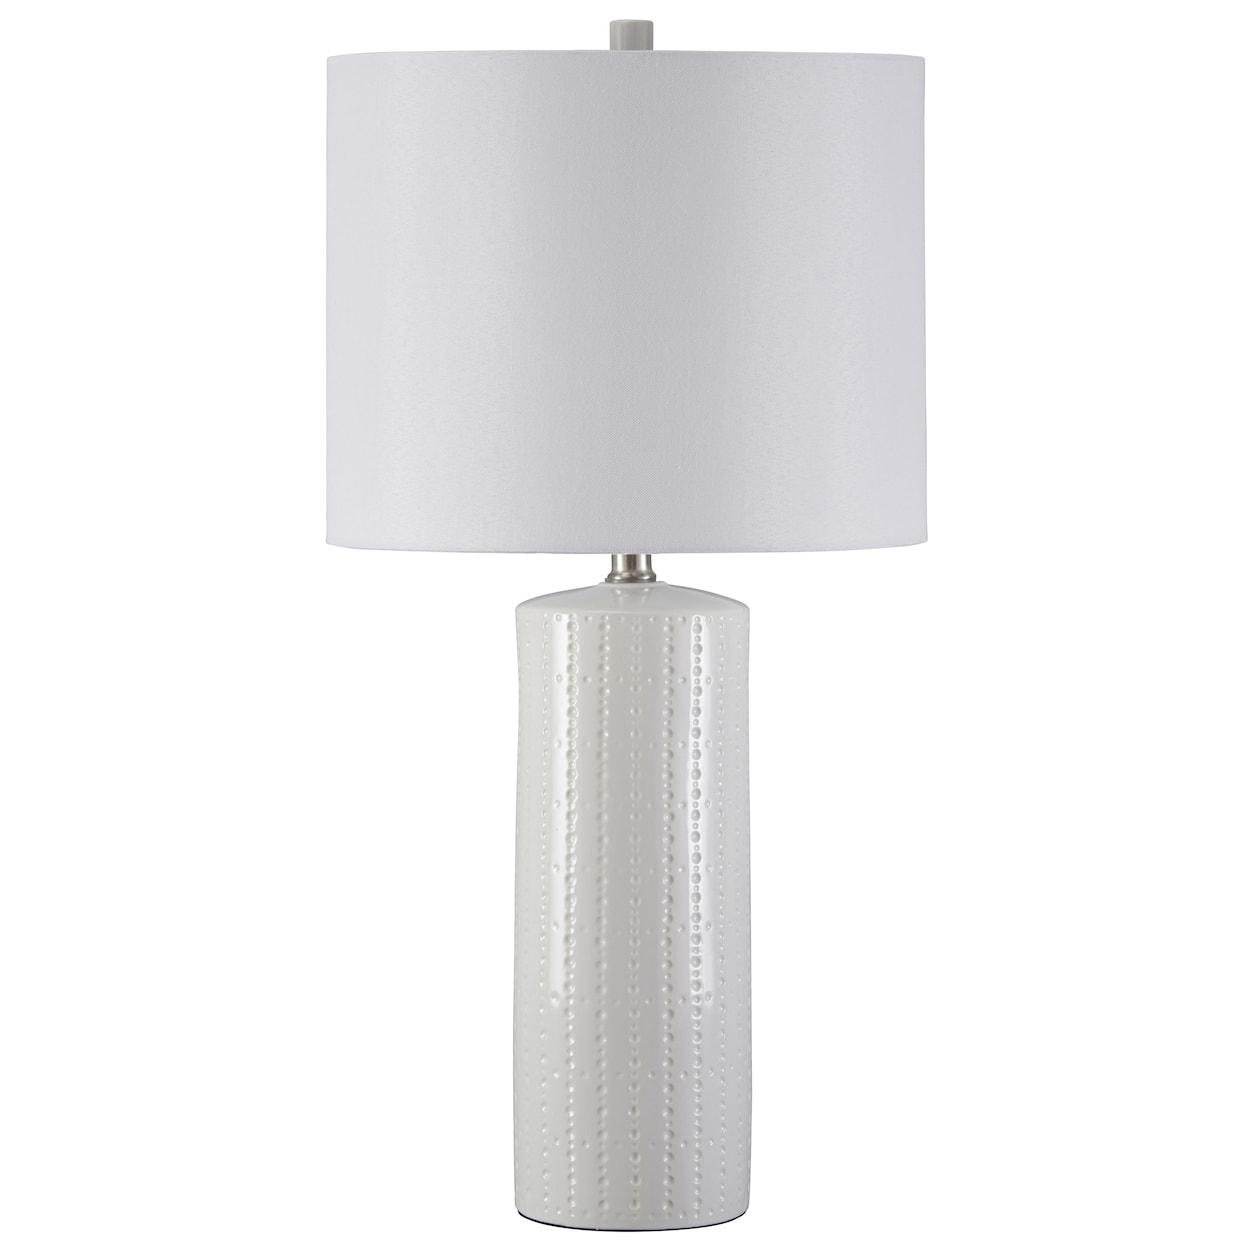 Signature Design by Ashley Lamps - Contemporary Ceramic Table Lamp